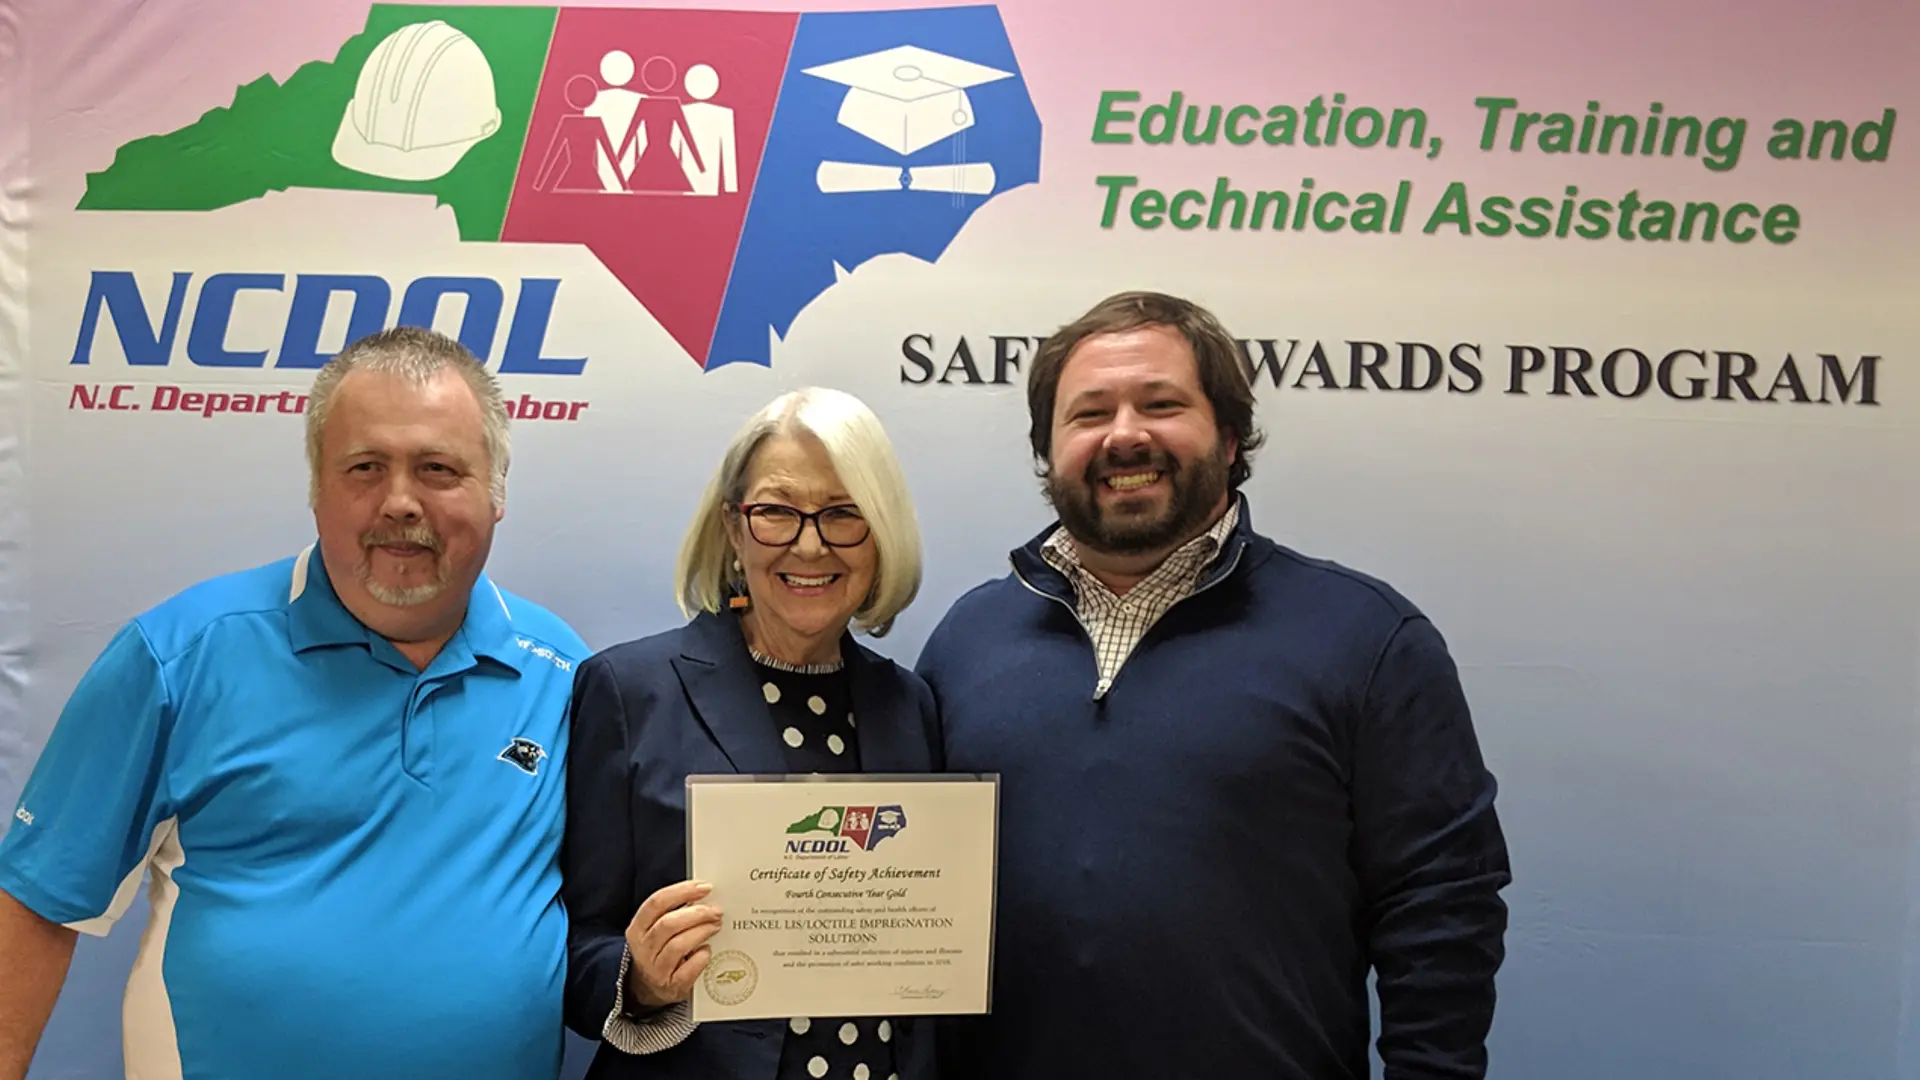 North Carolina Commissioner of Labor Cherie Berry presents the plant’s fourth consecutive Gold Certificate of Safety Achievement award to Henkel’s Charles McMurry, Jr. (left) and Plant Manager Trent Mason.